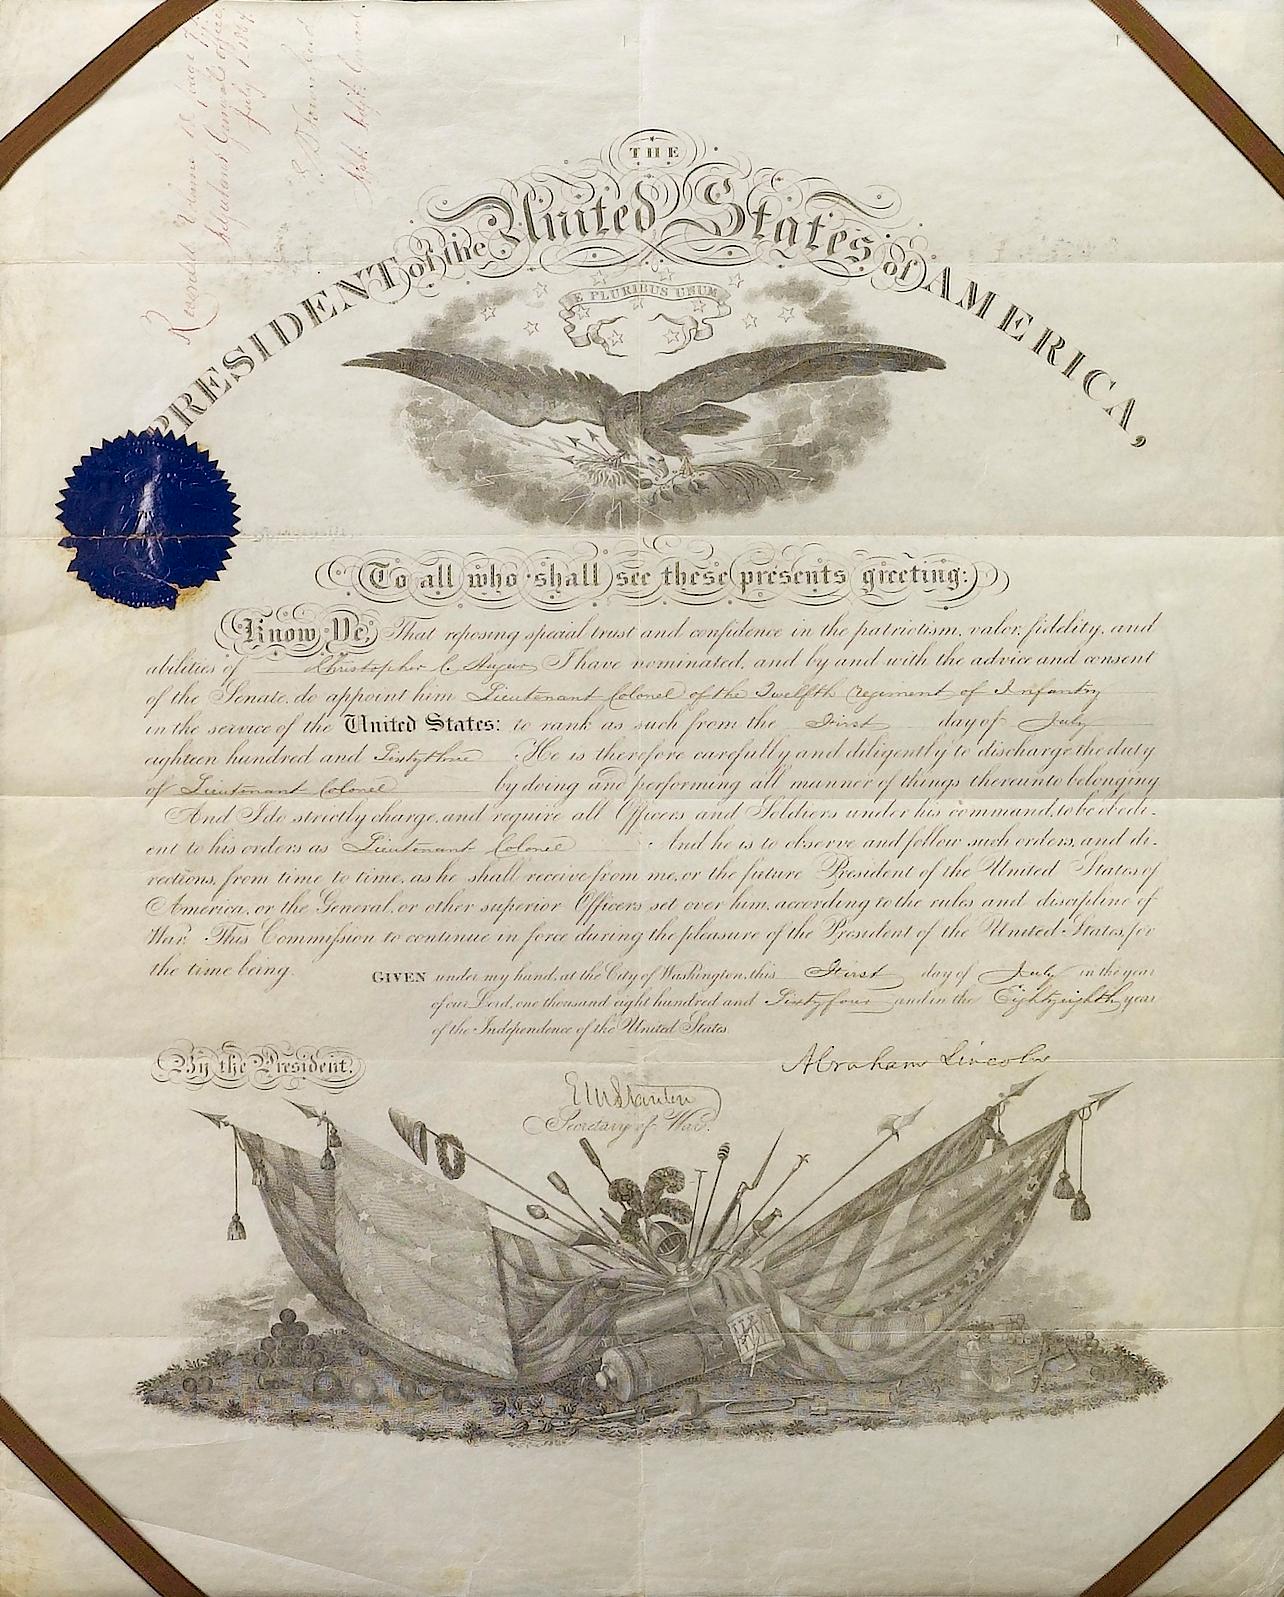 This is an original document signed by Abraham Lincoln as President, dated July 1, 1864. The document is a partly-printed official document appointing future Union major general Christopher C. Augur to Lieutenant Colonel of the 12th Regiment